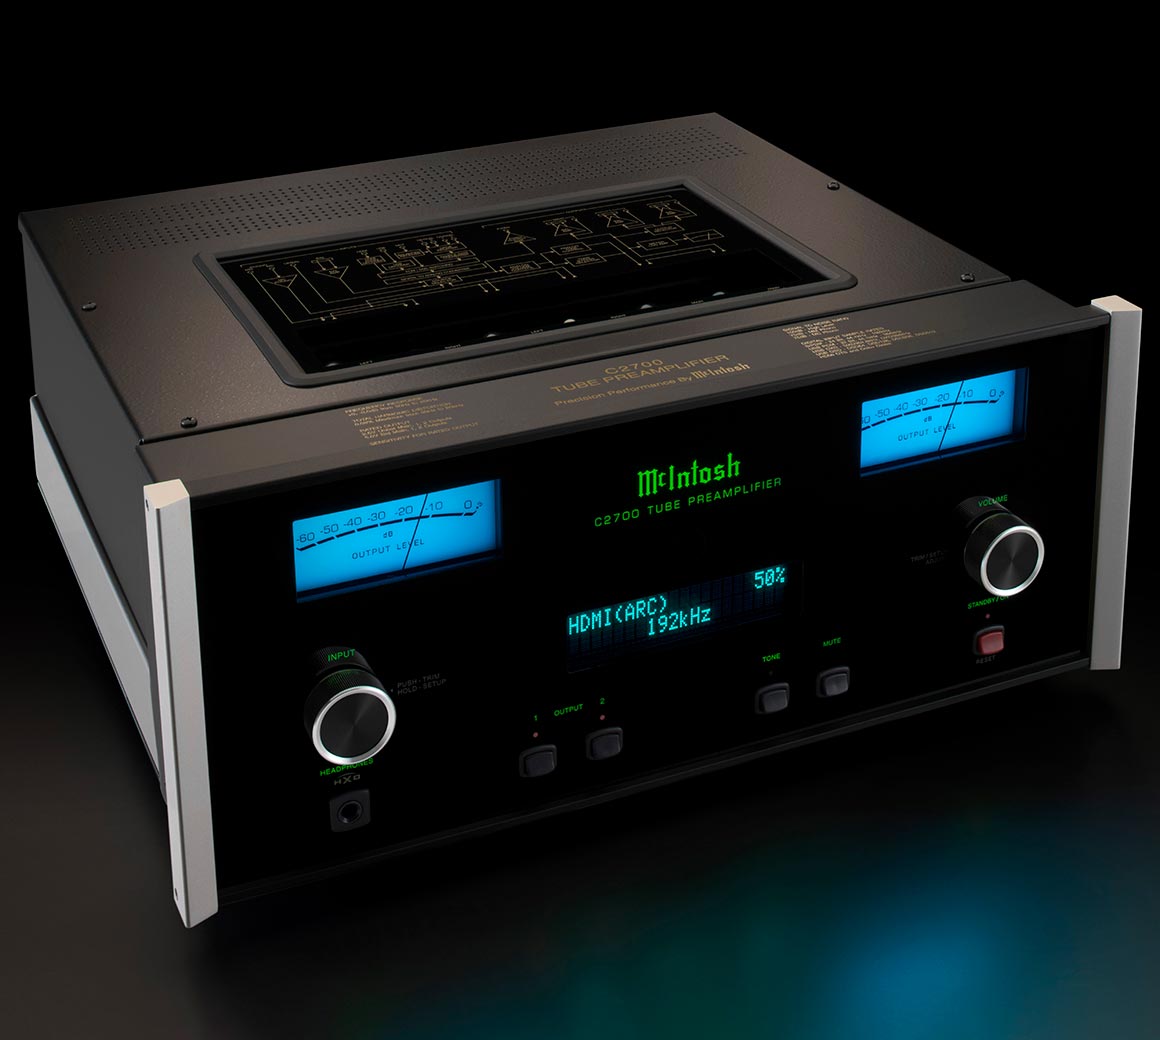 McIntosh Roon Tested